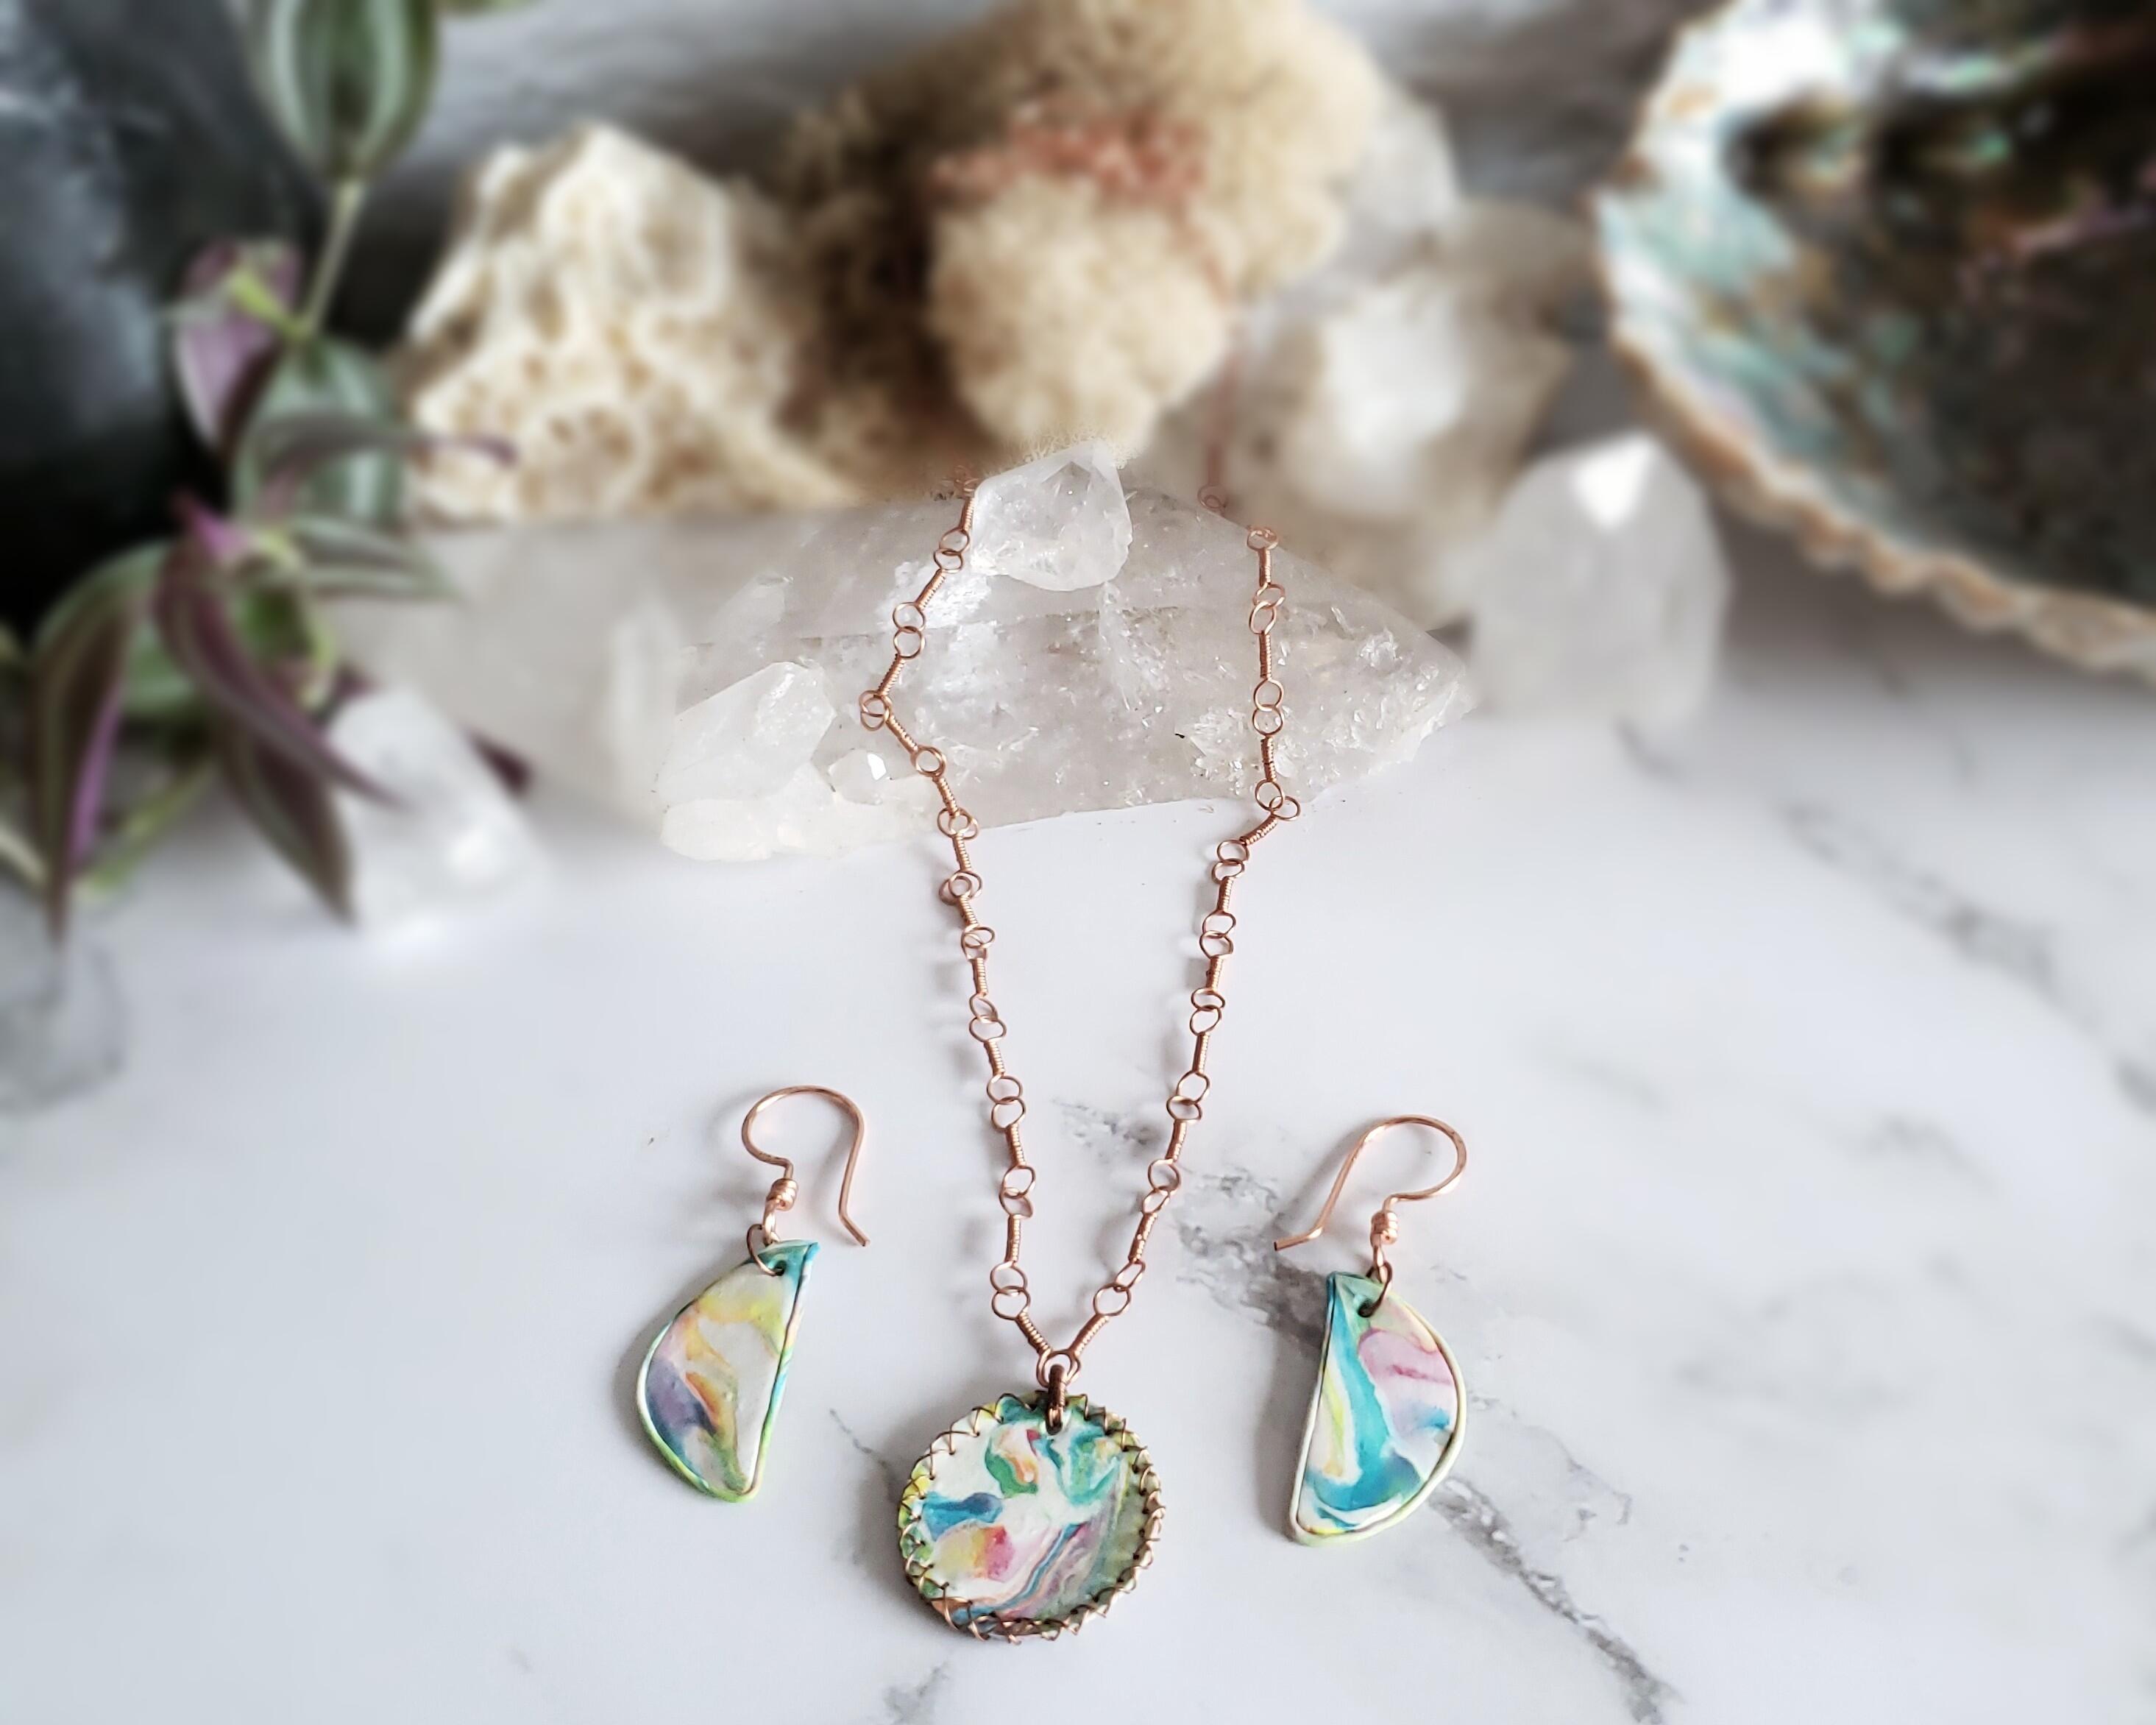 Watercolor Copper Necklace and Earrings Jewelry Set